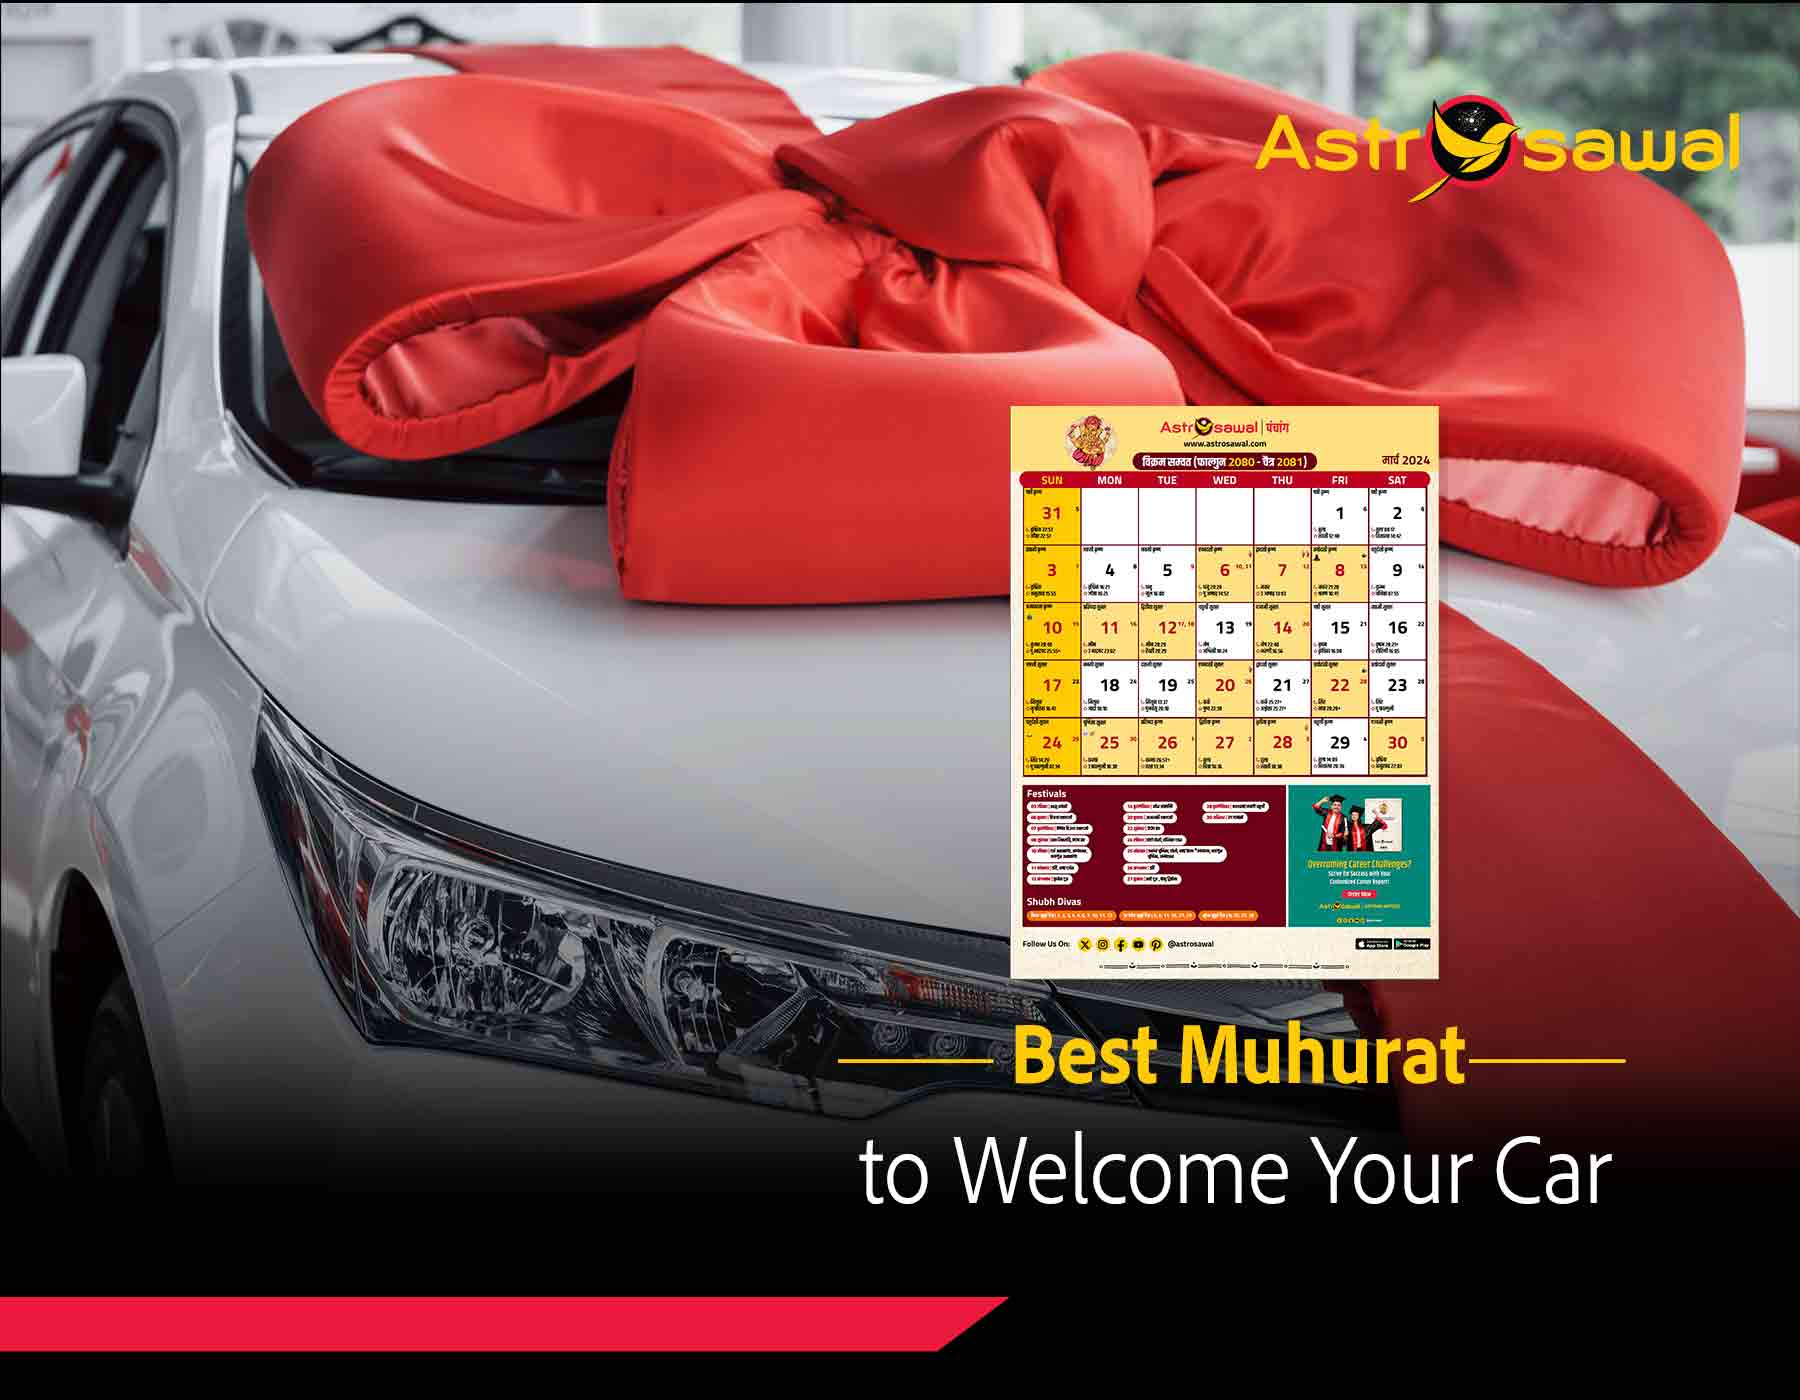 Namaste, New Wheels! Choosing the Best Muhurat to Welcome Your Car